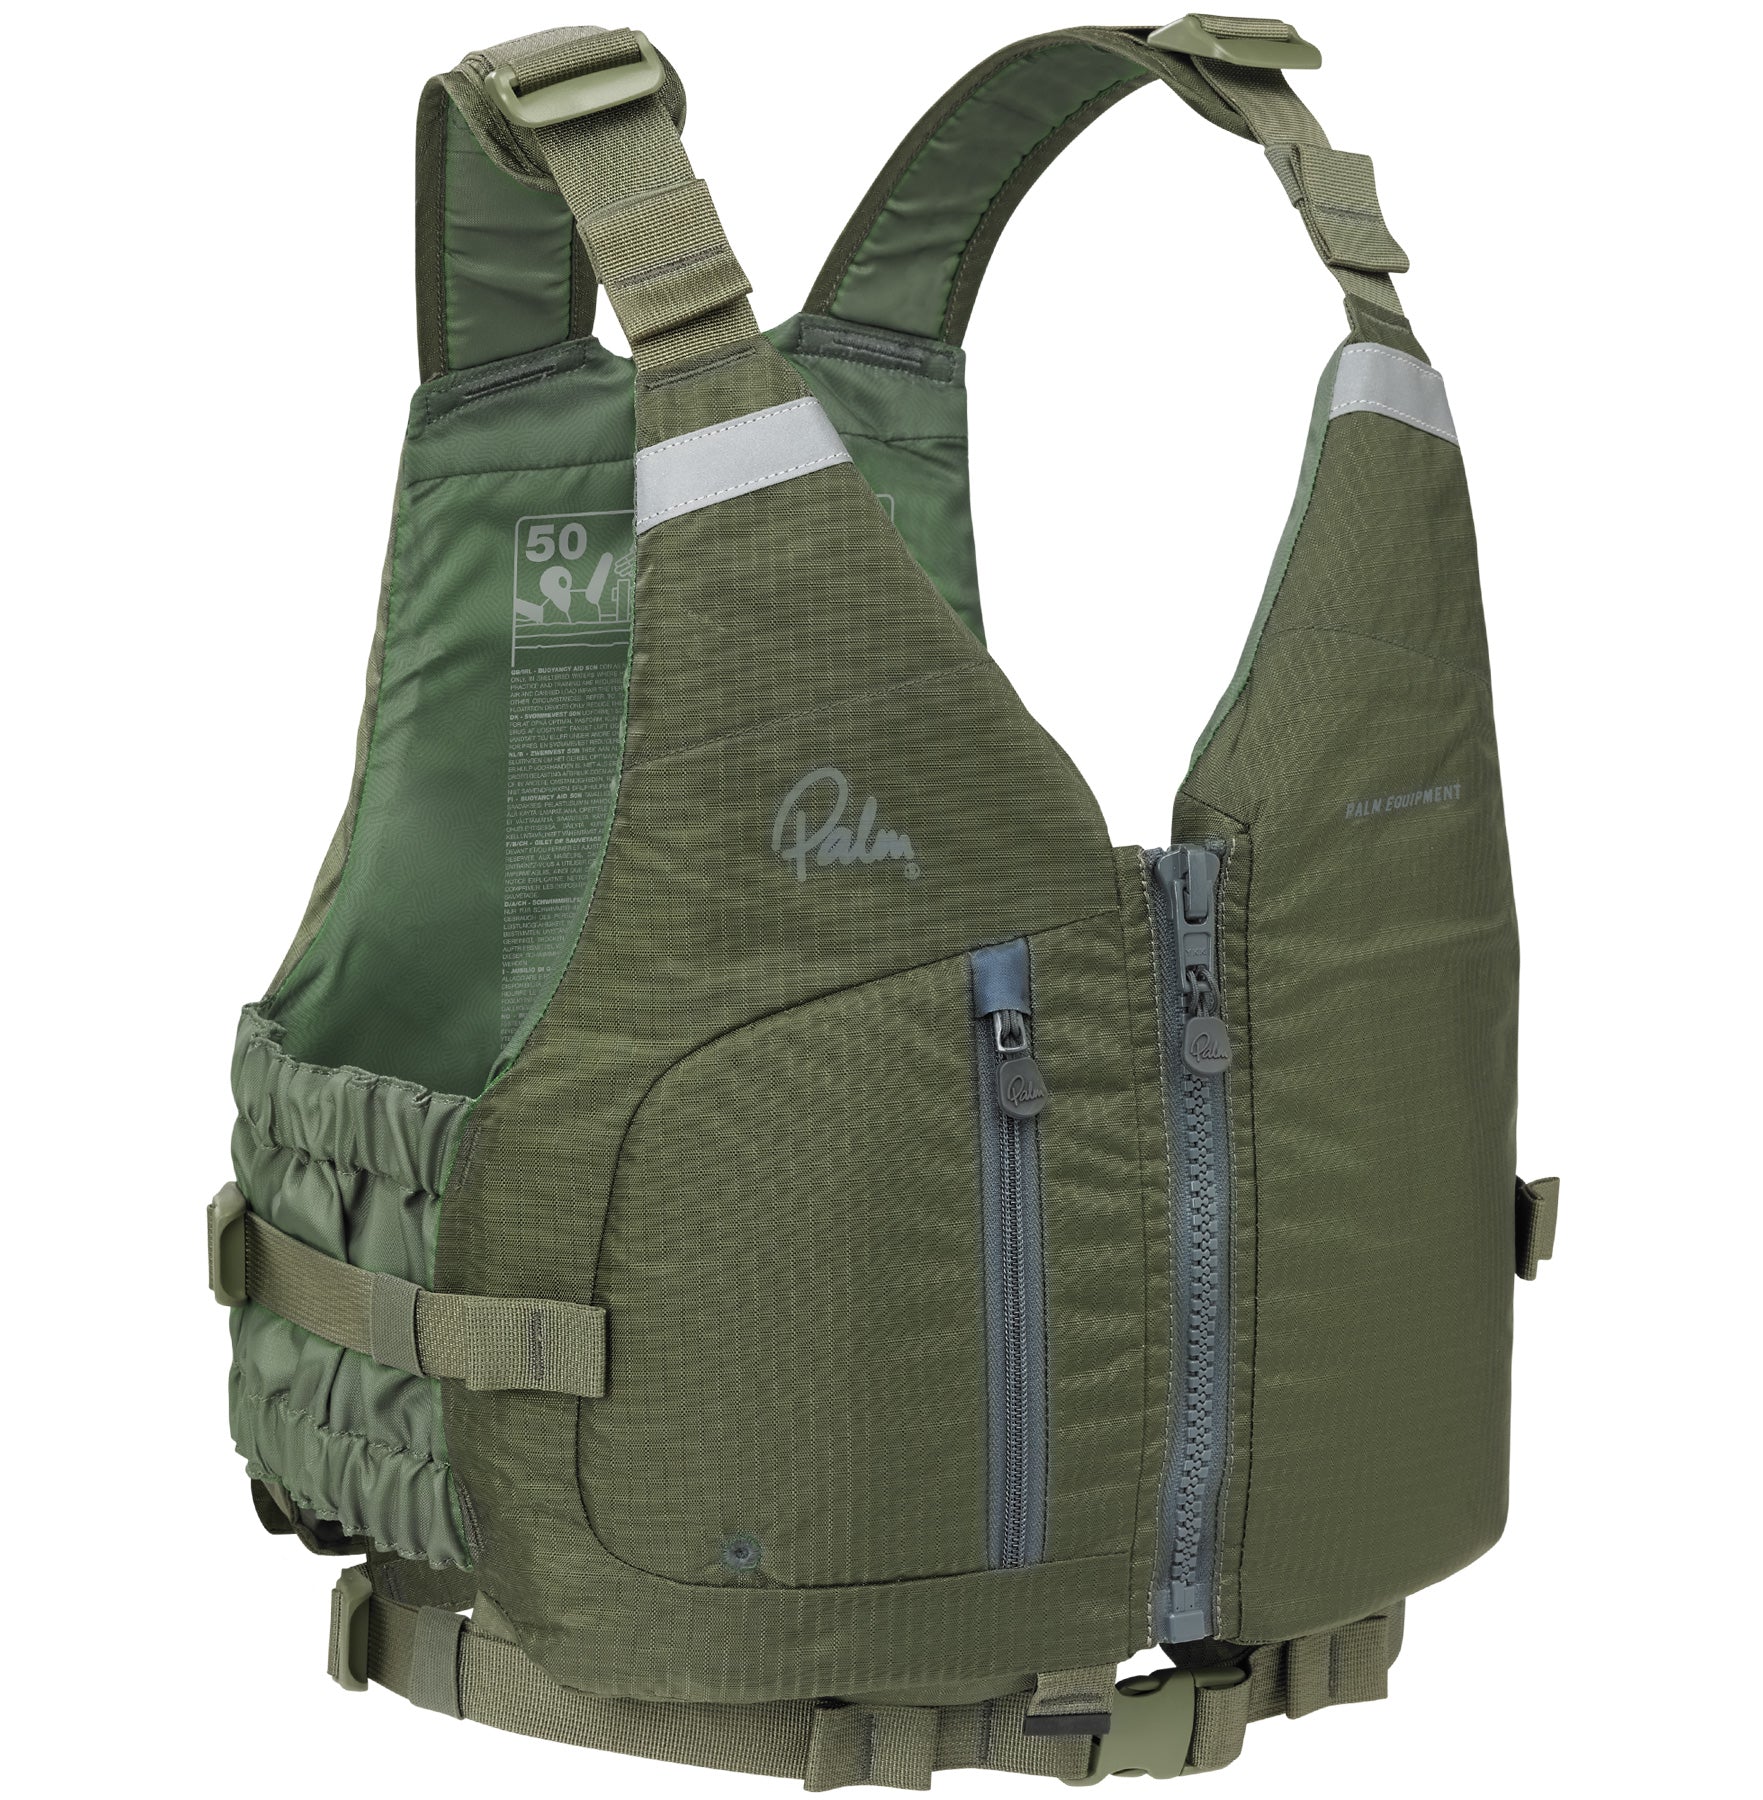 Olive green Palm Meander buoyancy aid